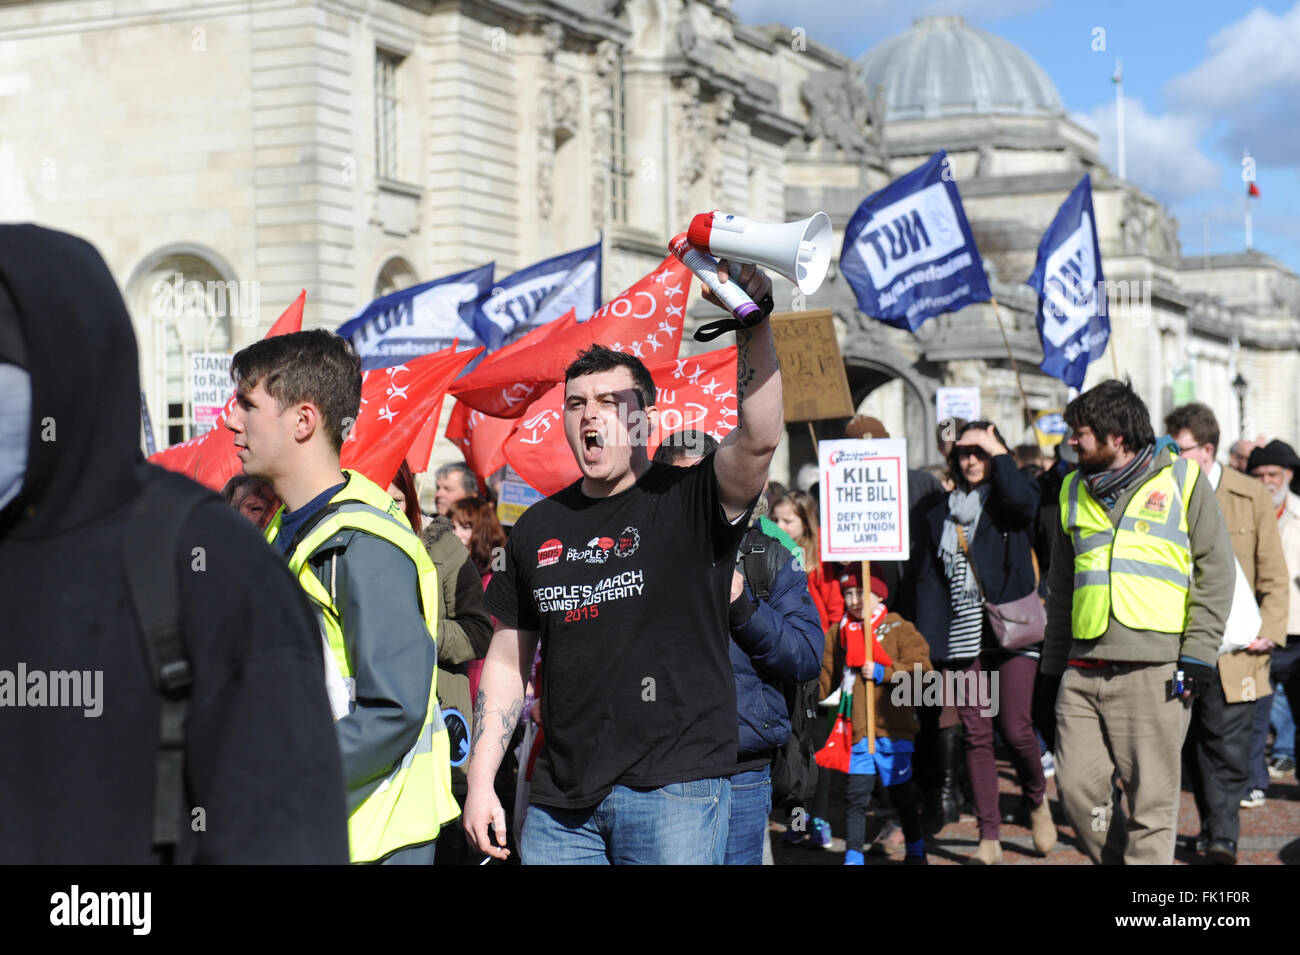 Cardiff, Wales, UK. Crowds gather outside the national Museum of Wales to march prior to a speech by Labour Leader Jeremy Corbyn MP, at a rally opposing Tory plans to weaken trade unions. The crowds are shouting, wearing anti austerity tshirts and waving NUT flags Stock Photo